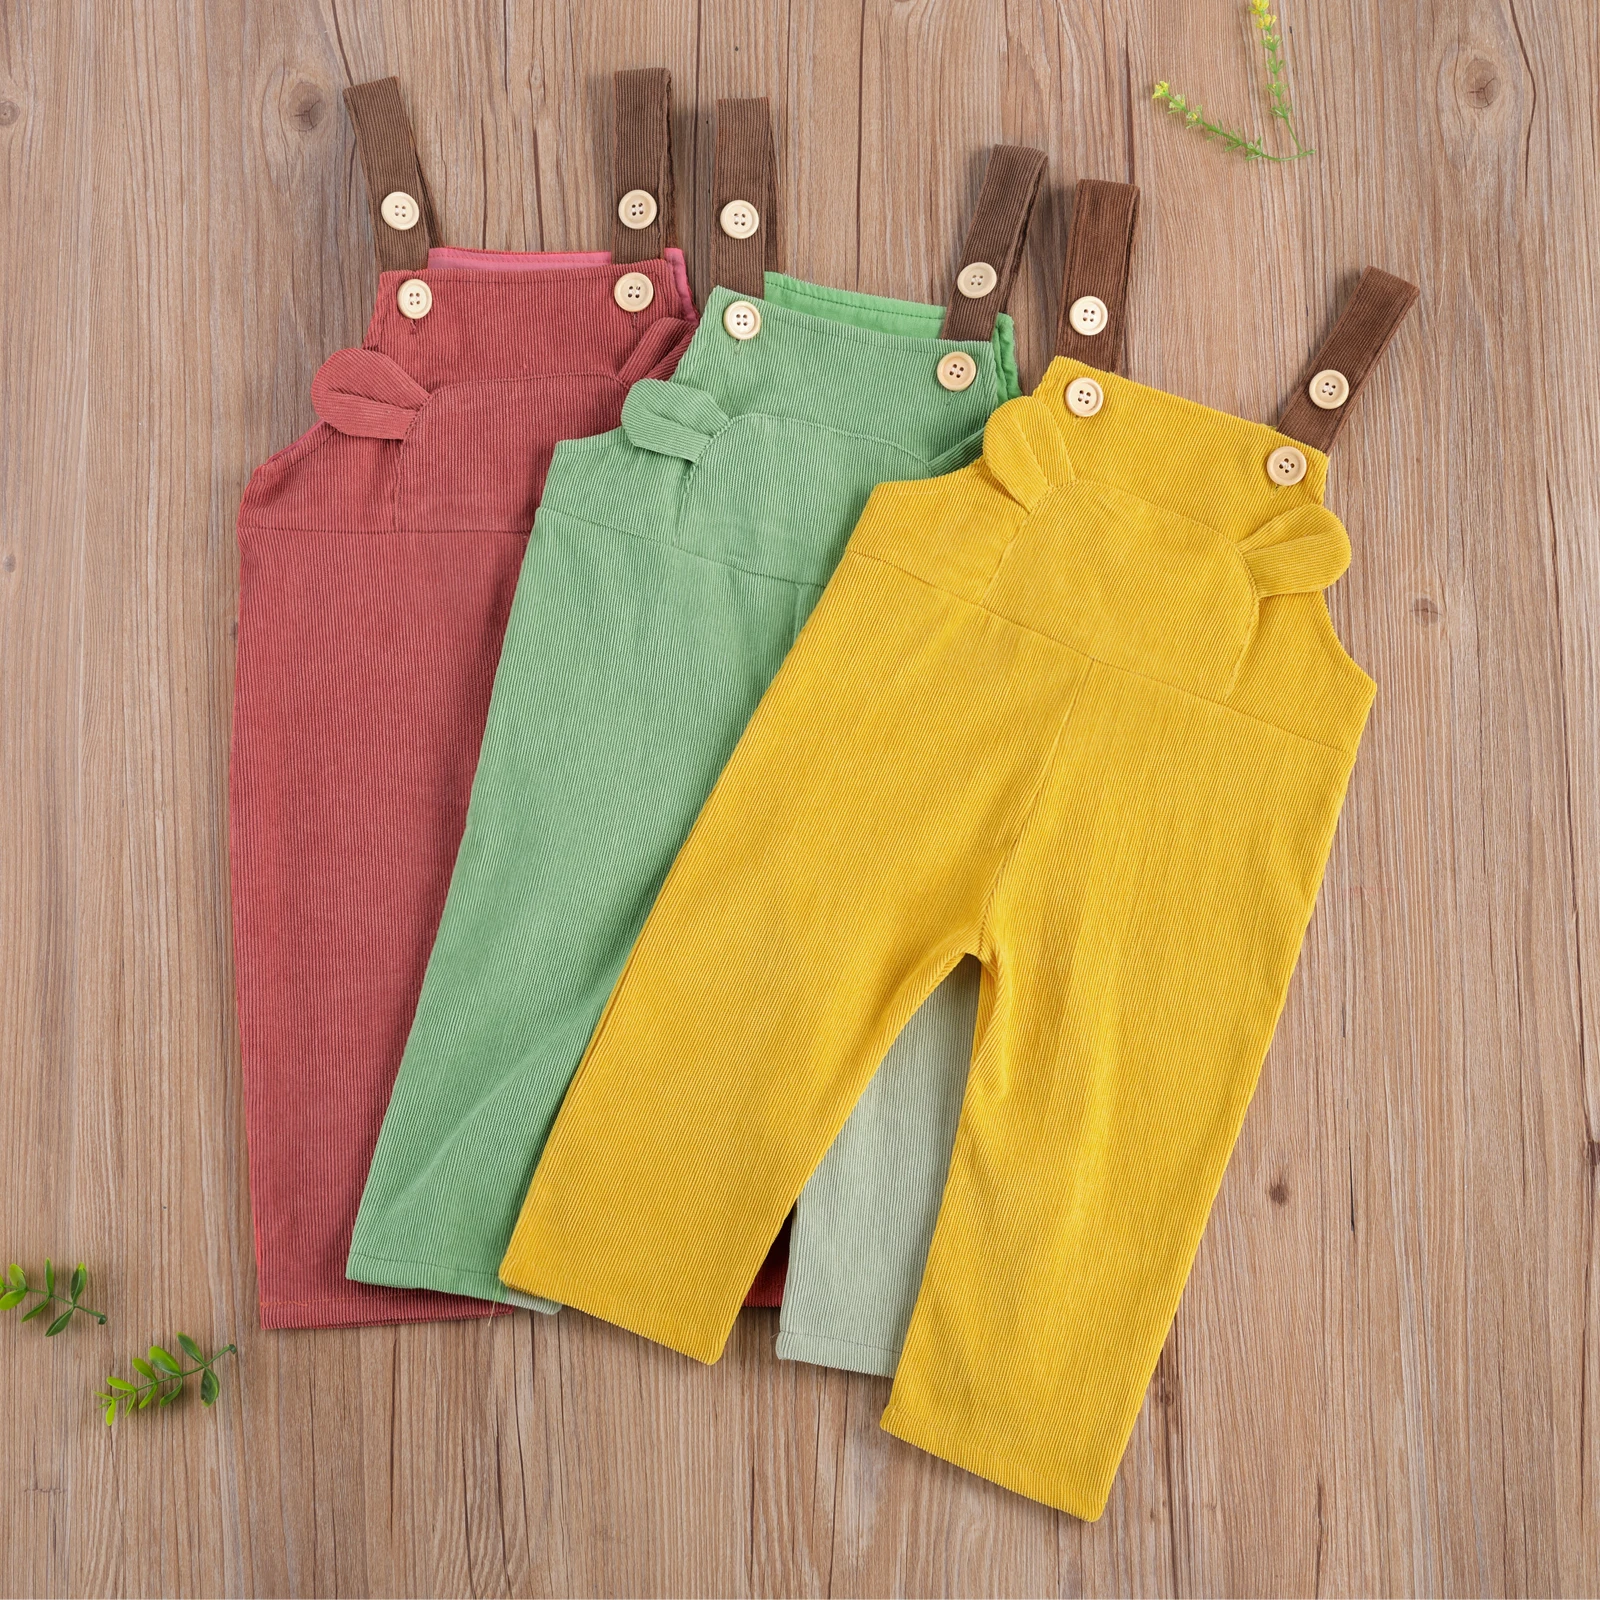 Aixin Kids Toddler Baby Boy Girl Overalls Solid Straps Suspender Pants Corduroy Bib Trousers with Pocket Bottoms Fall Winter 